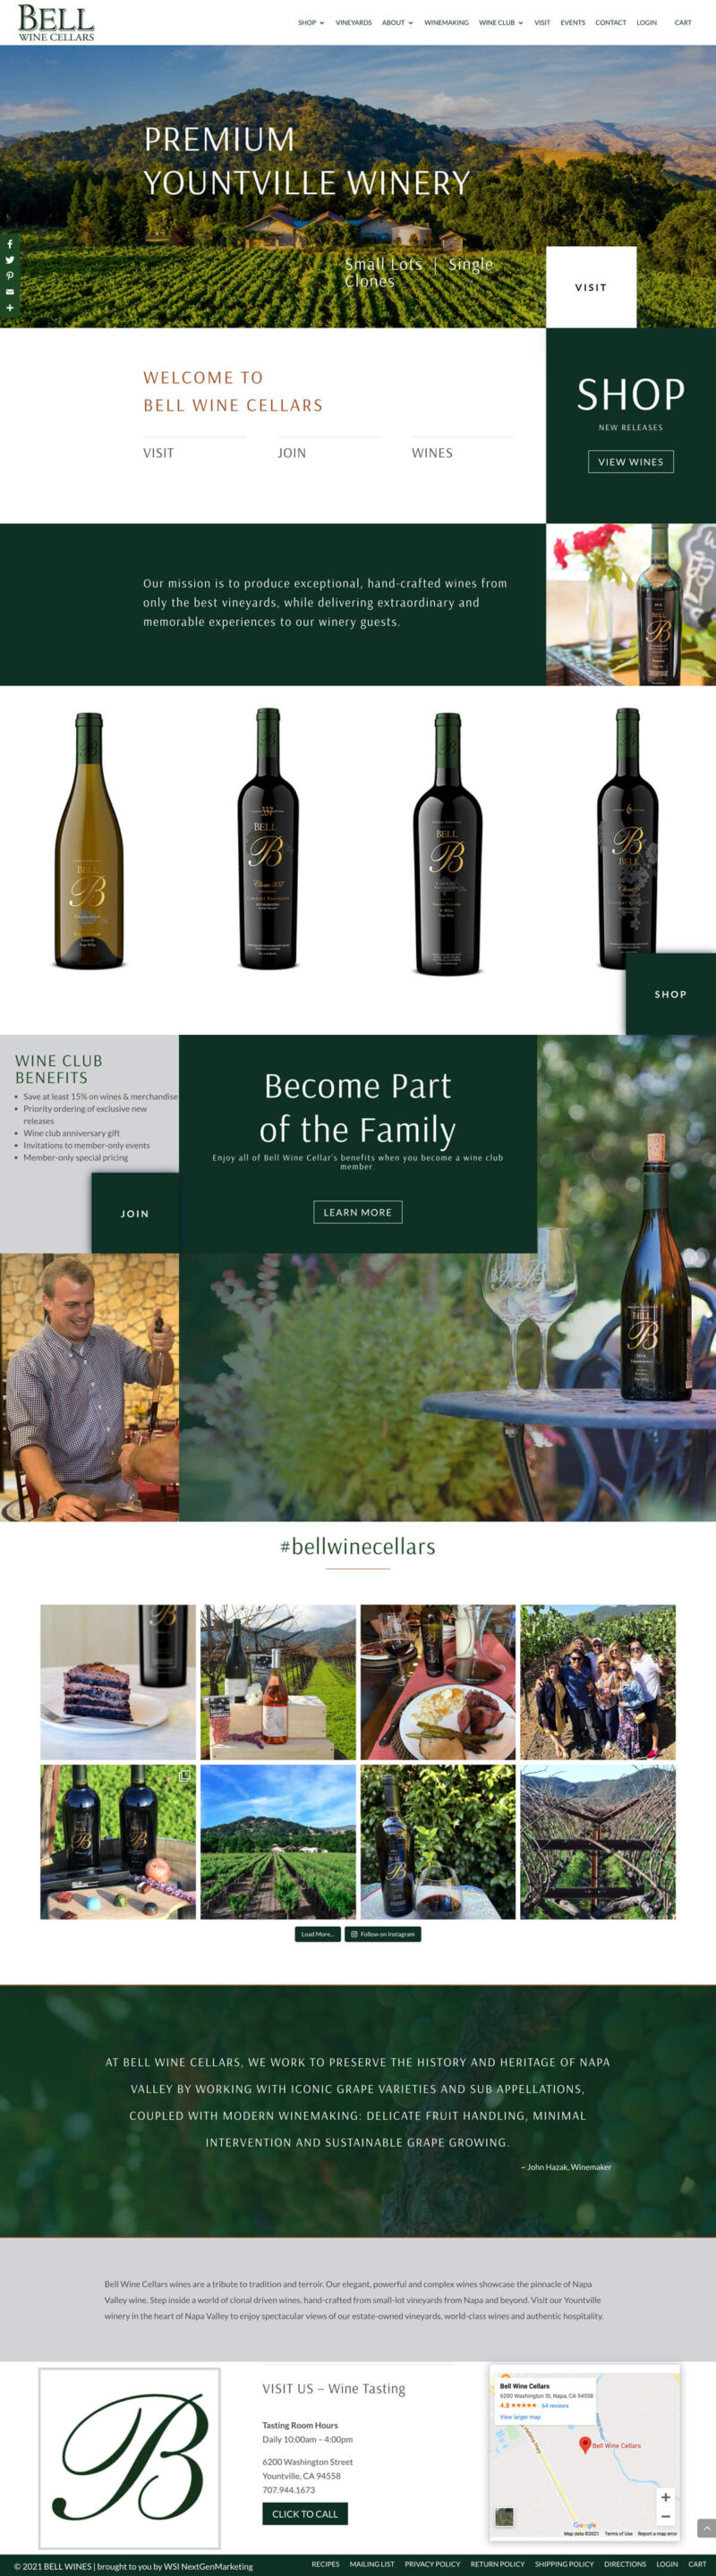 bell-wine-home-page-winery-website-design